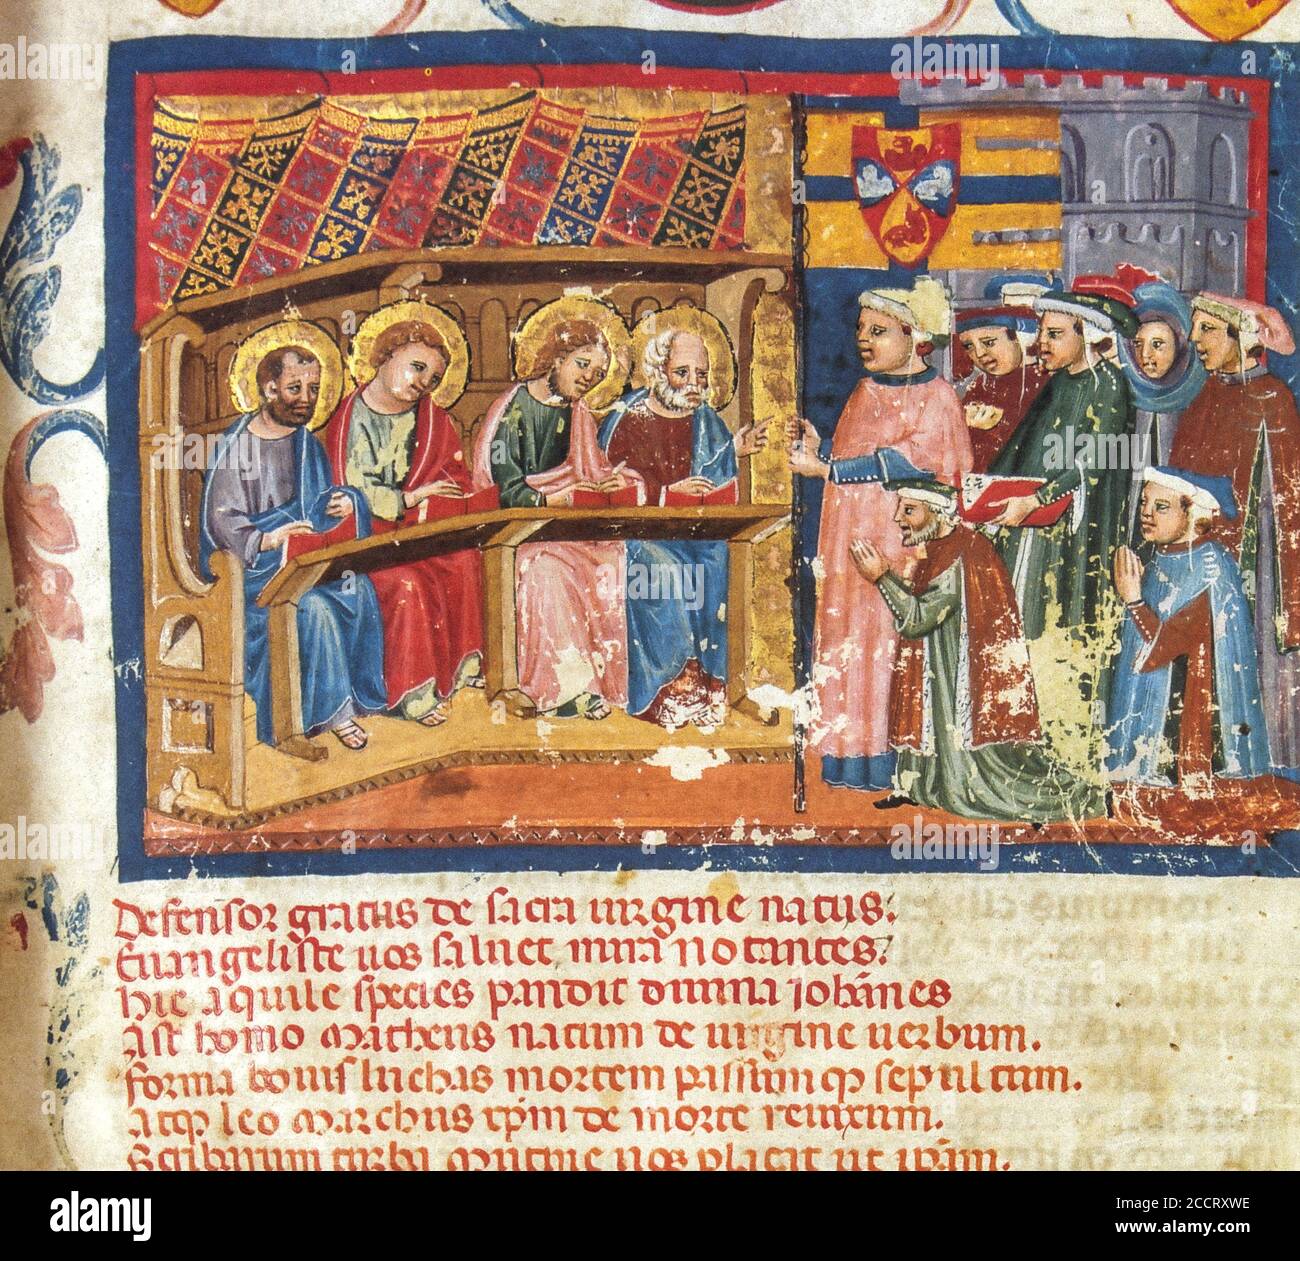 Italy Emilia Romagna - Modena -Palazzo Fiocchi -  Archivio Notarile - Miniature with Notaries taking an oath in the presence of the evangelists, patrons of art Stock Photo